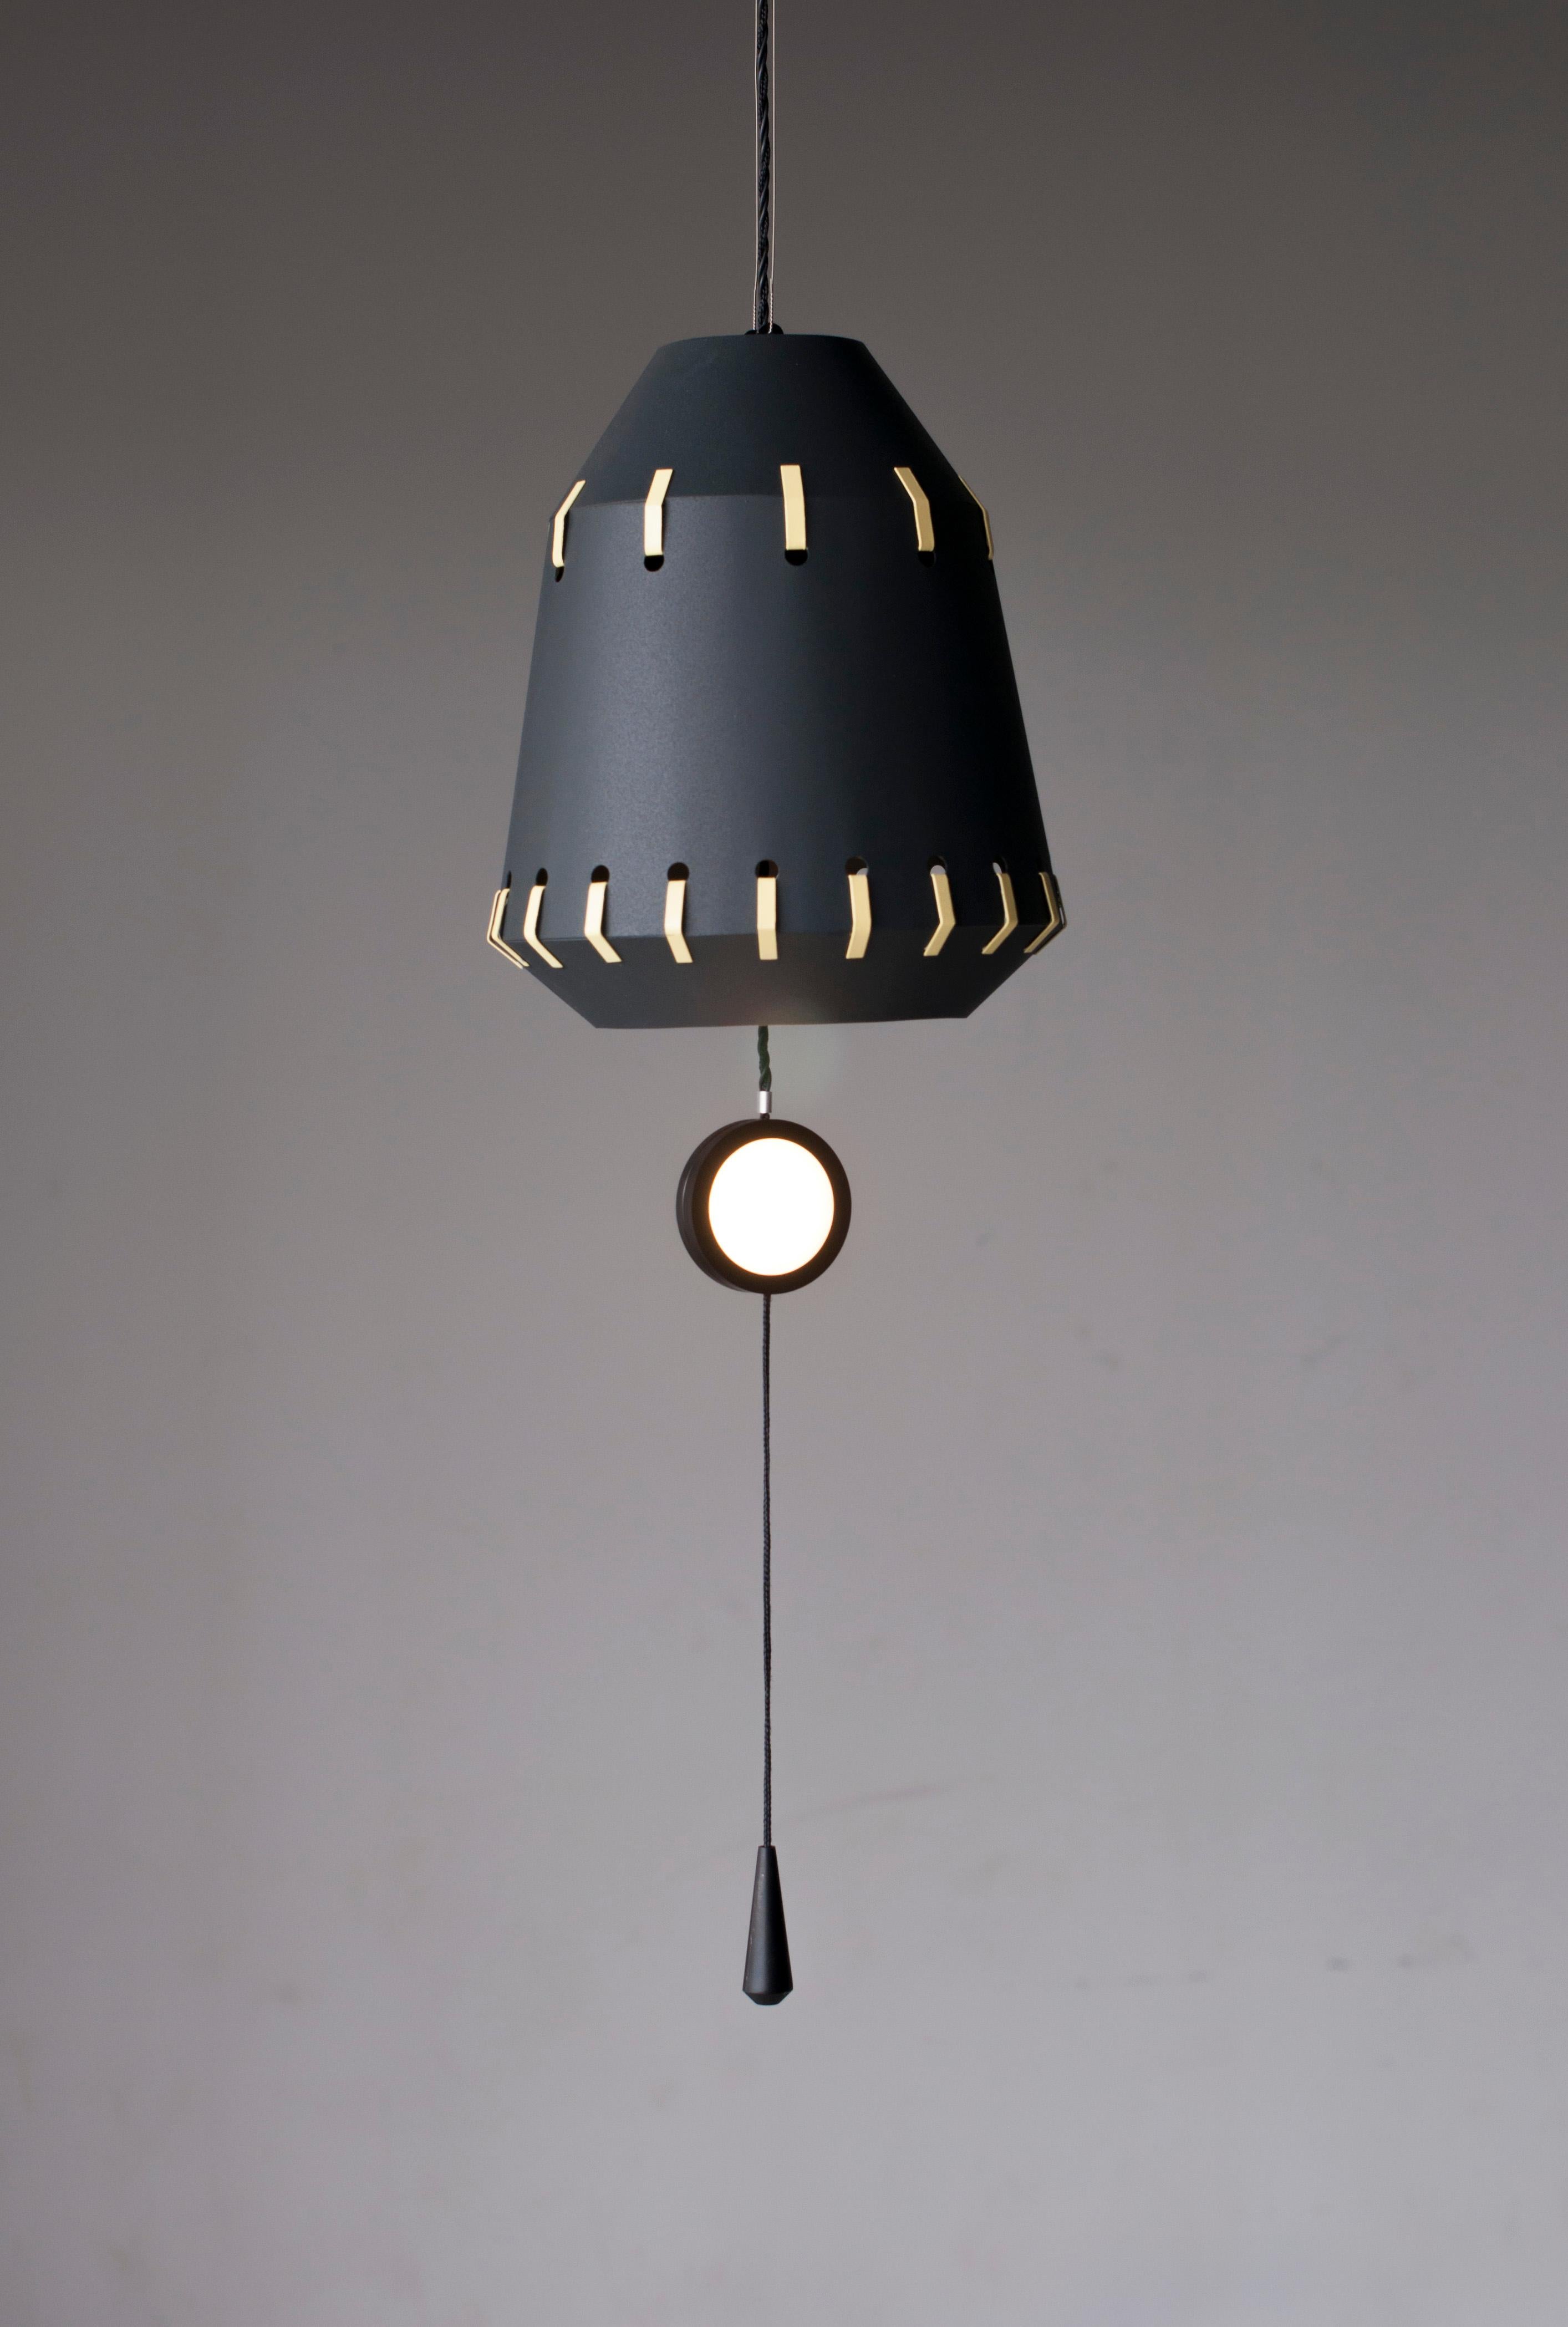 Art Deco Exploded View Eclipse, Pendant Light, Special Handmade in Europe by Vantot 